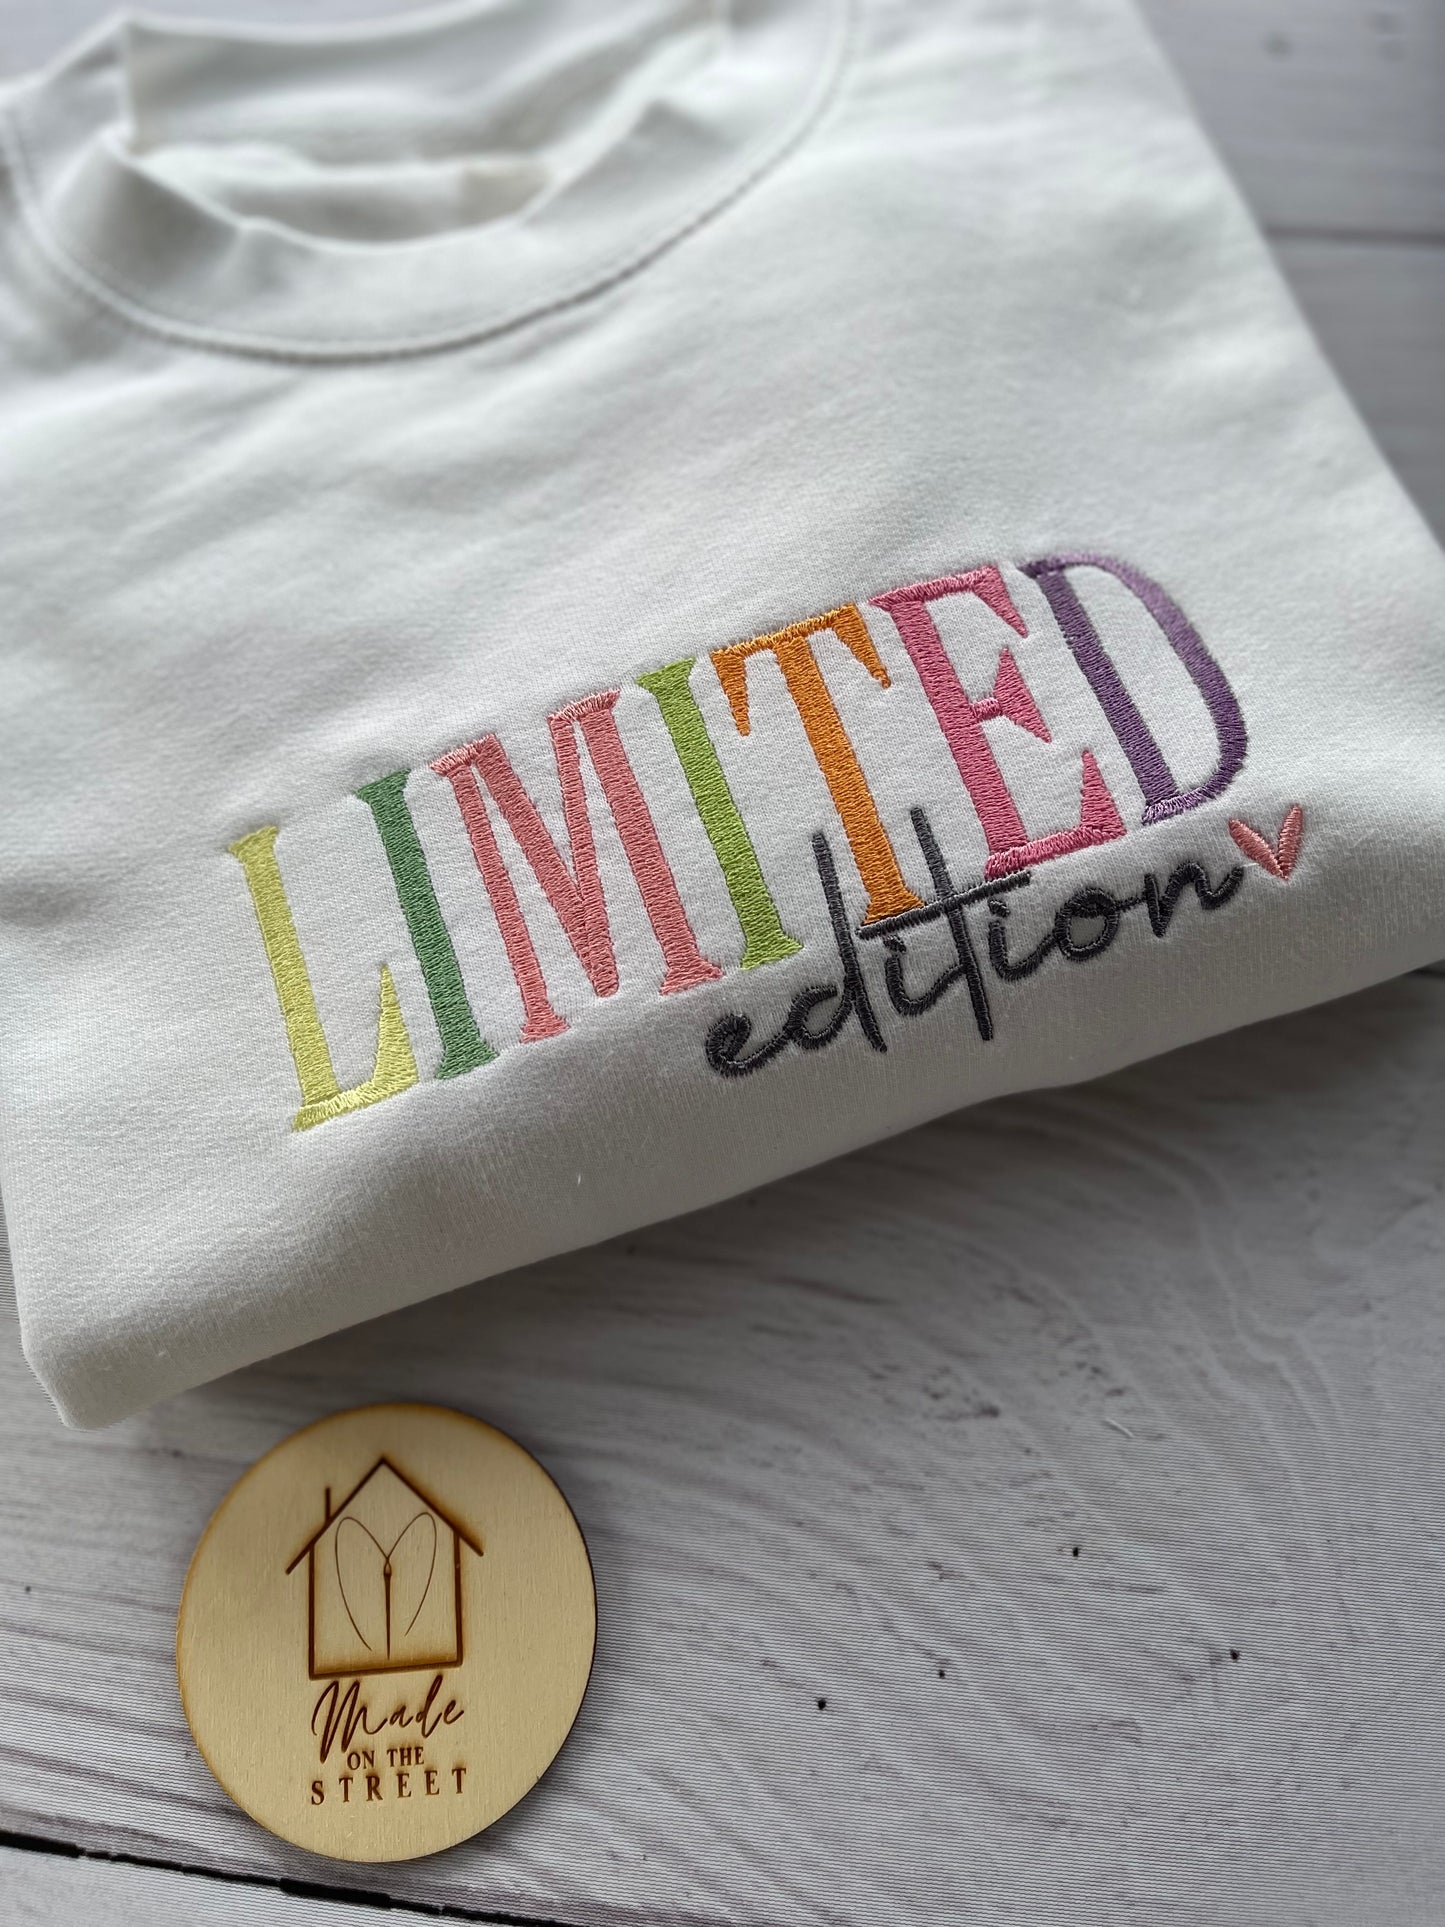 Limited Edition Jumper - Adults & Littles